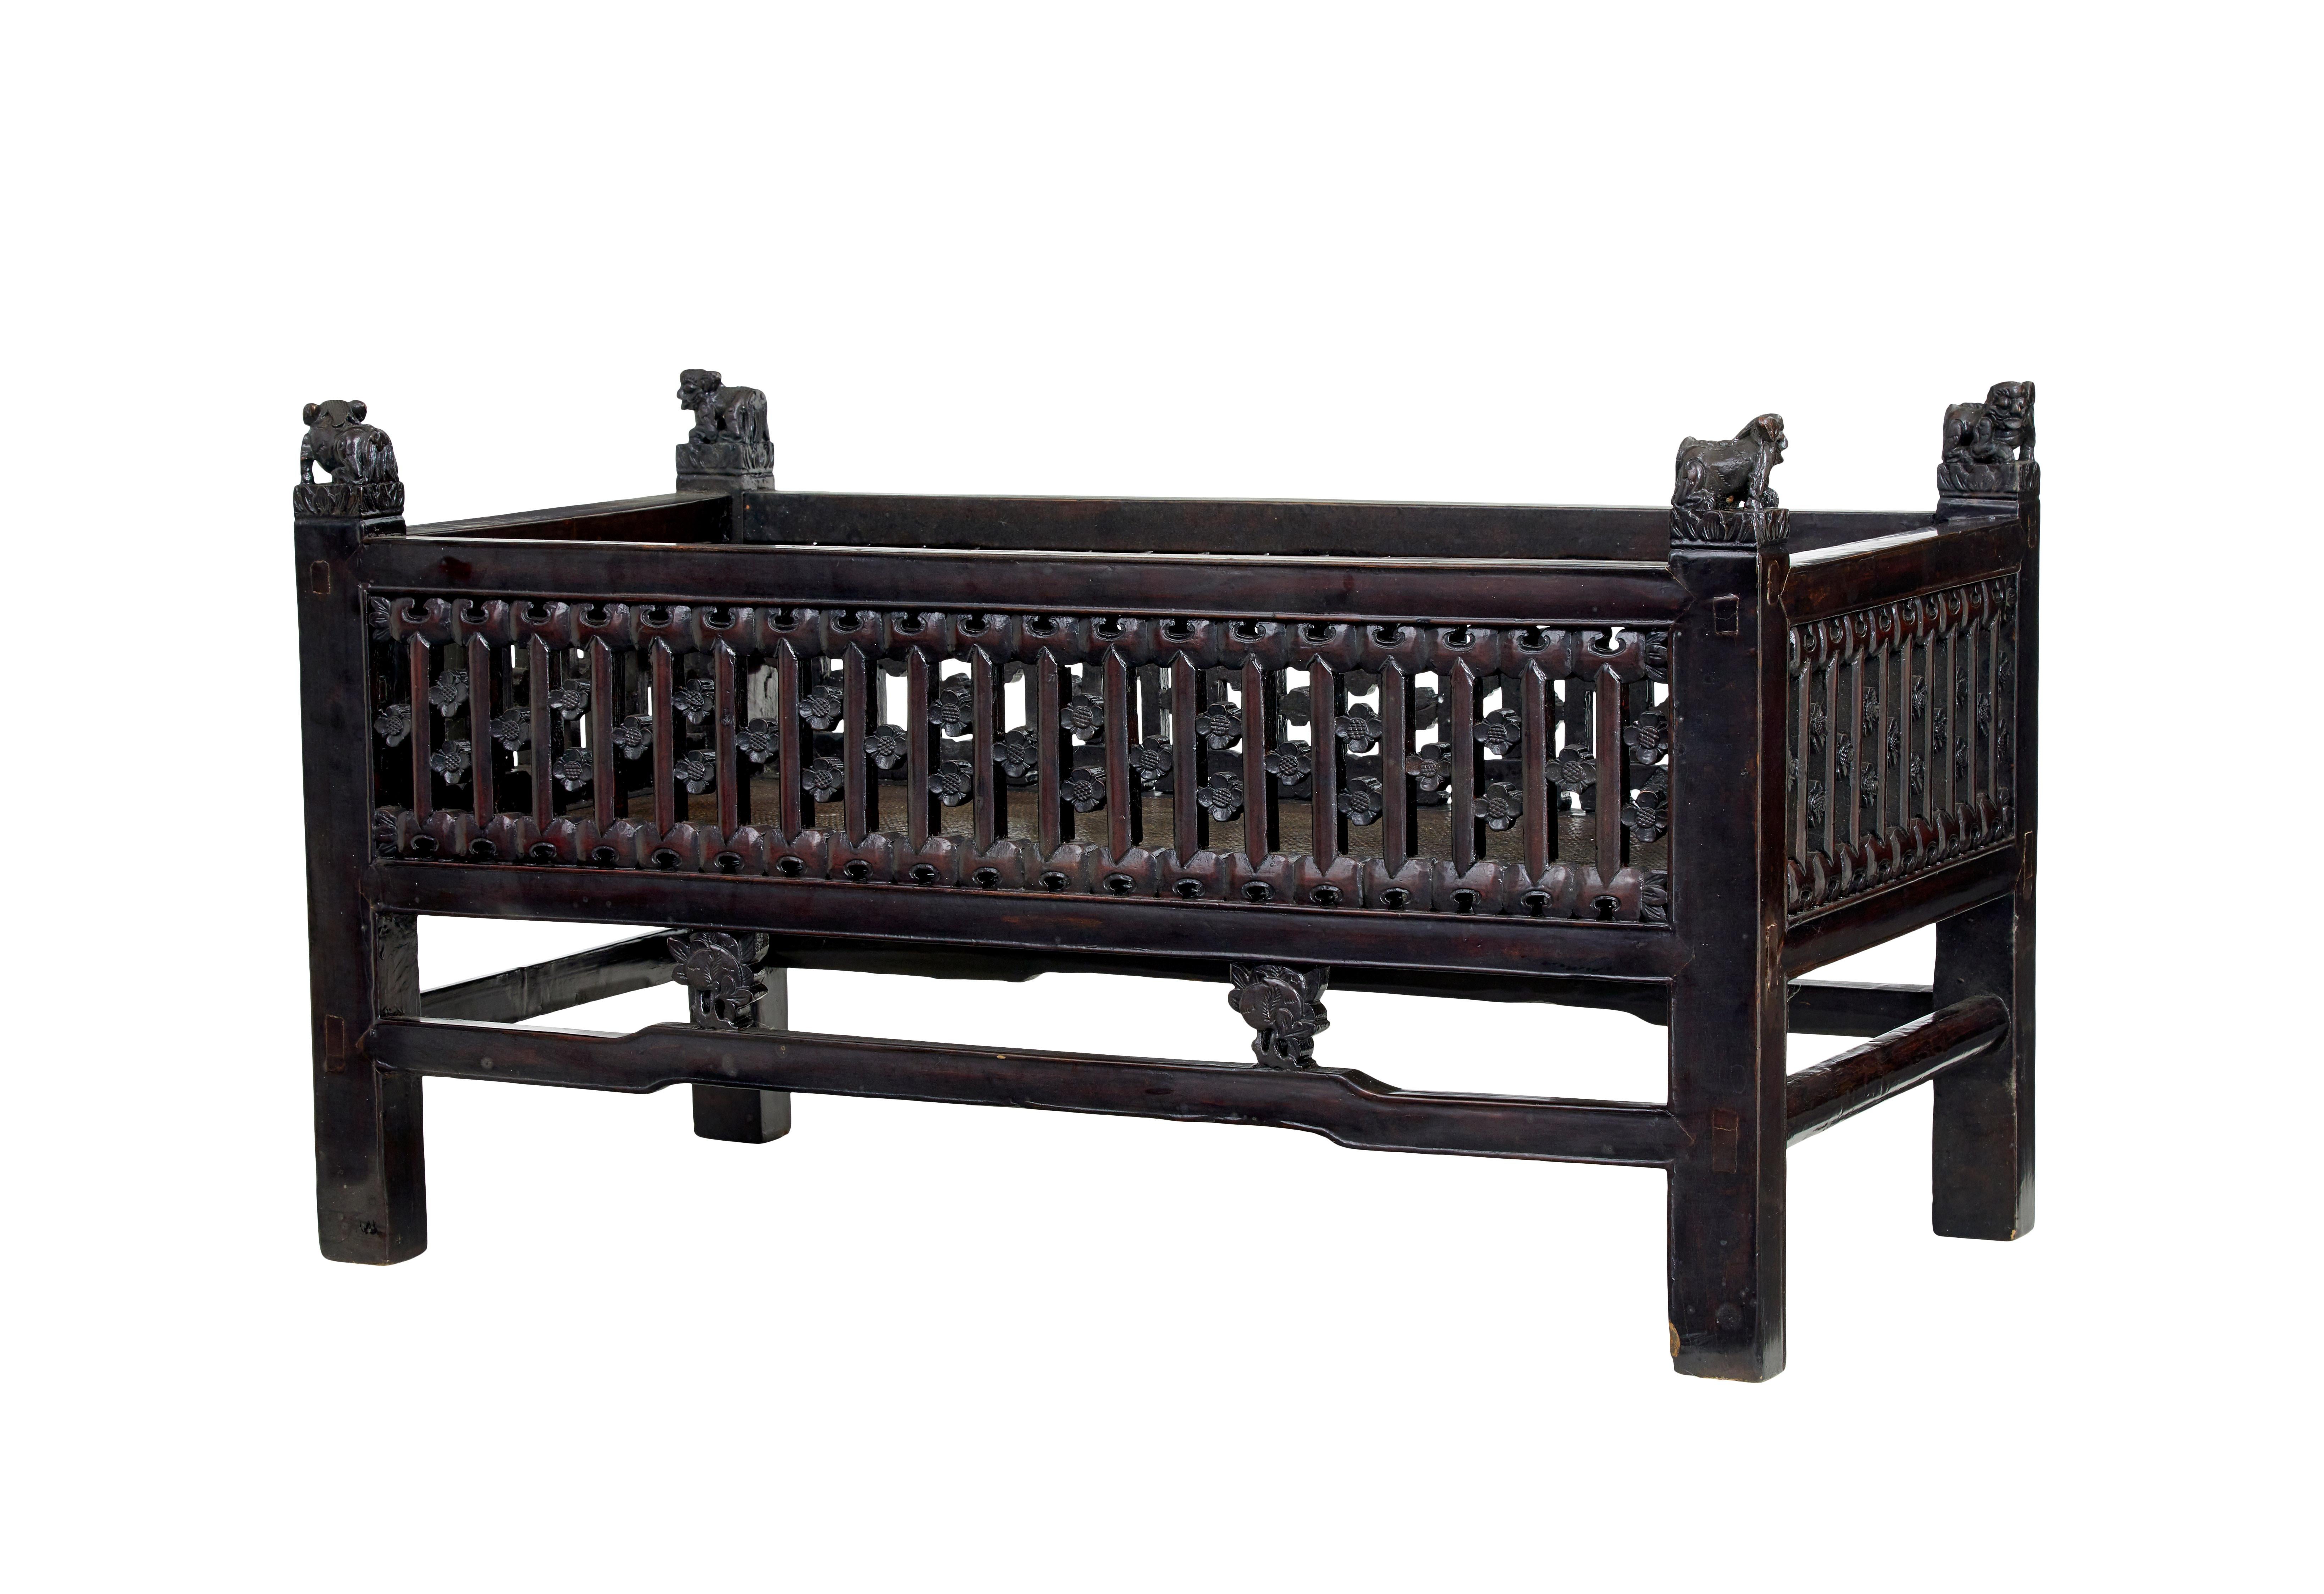 19th century Chinese carved hardwood bed circa 1890.

Chinese export which we believe may have been made as a childs bed. Carved pierced sides decorated with flowers.  Each corner with a carved dof of fo.  Hard rattan base.

In today's age it could